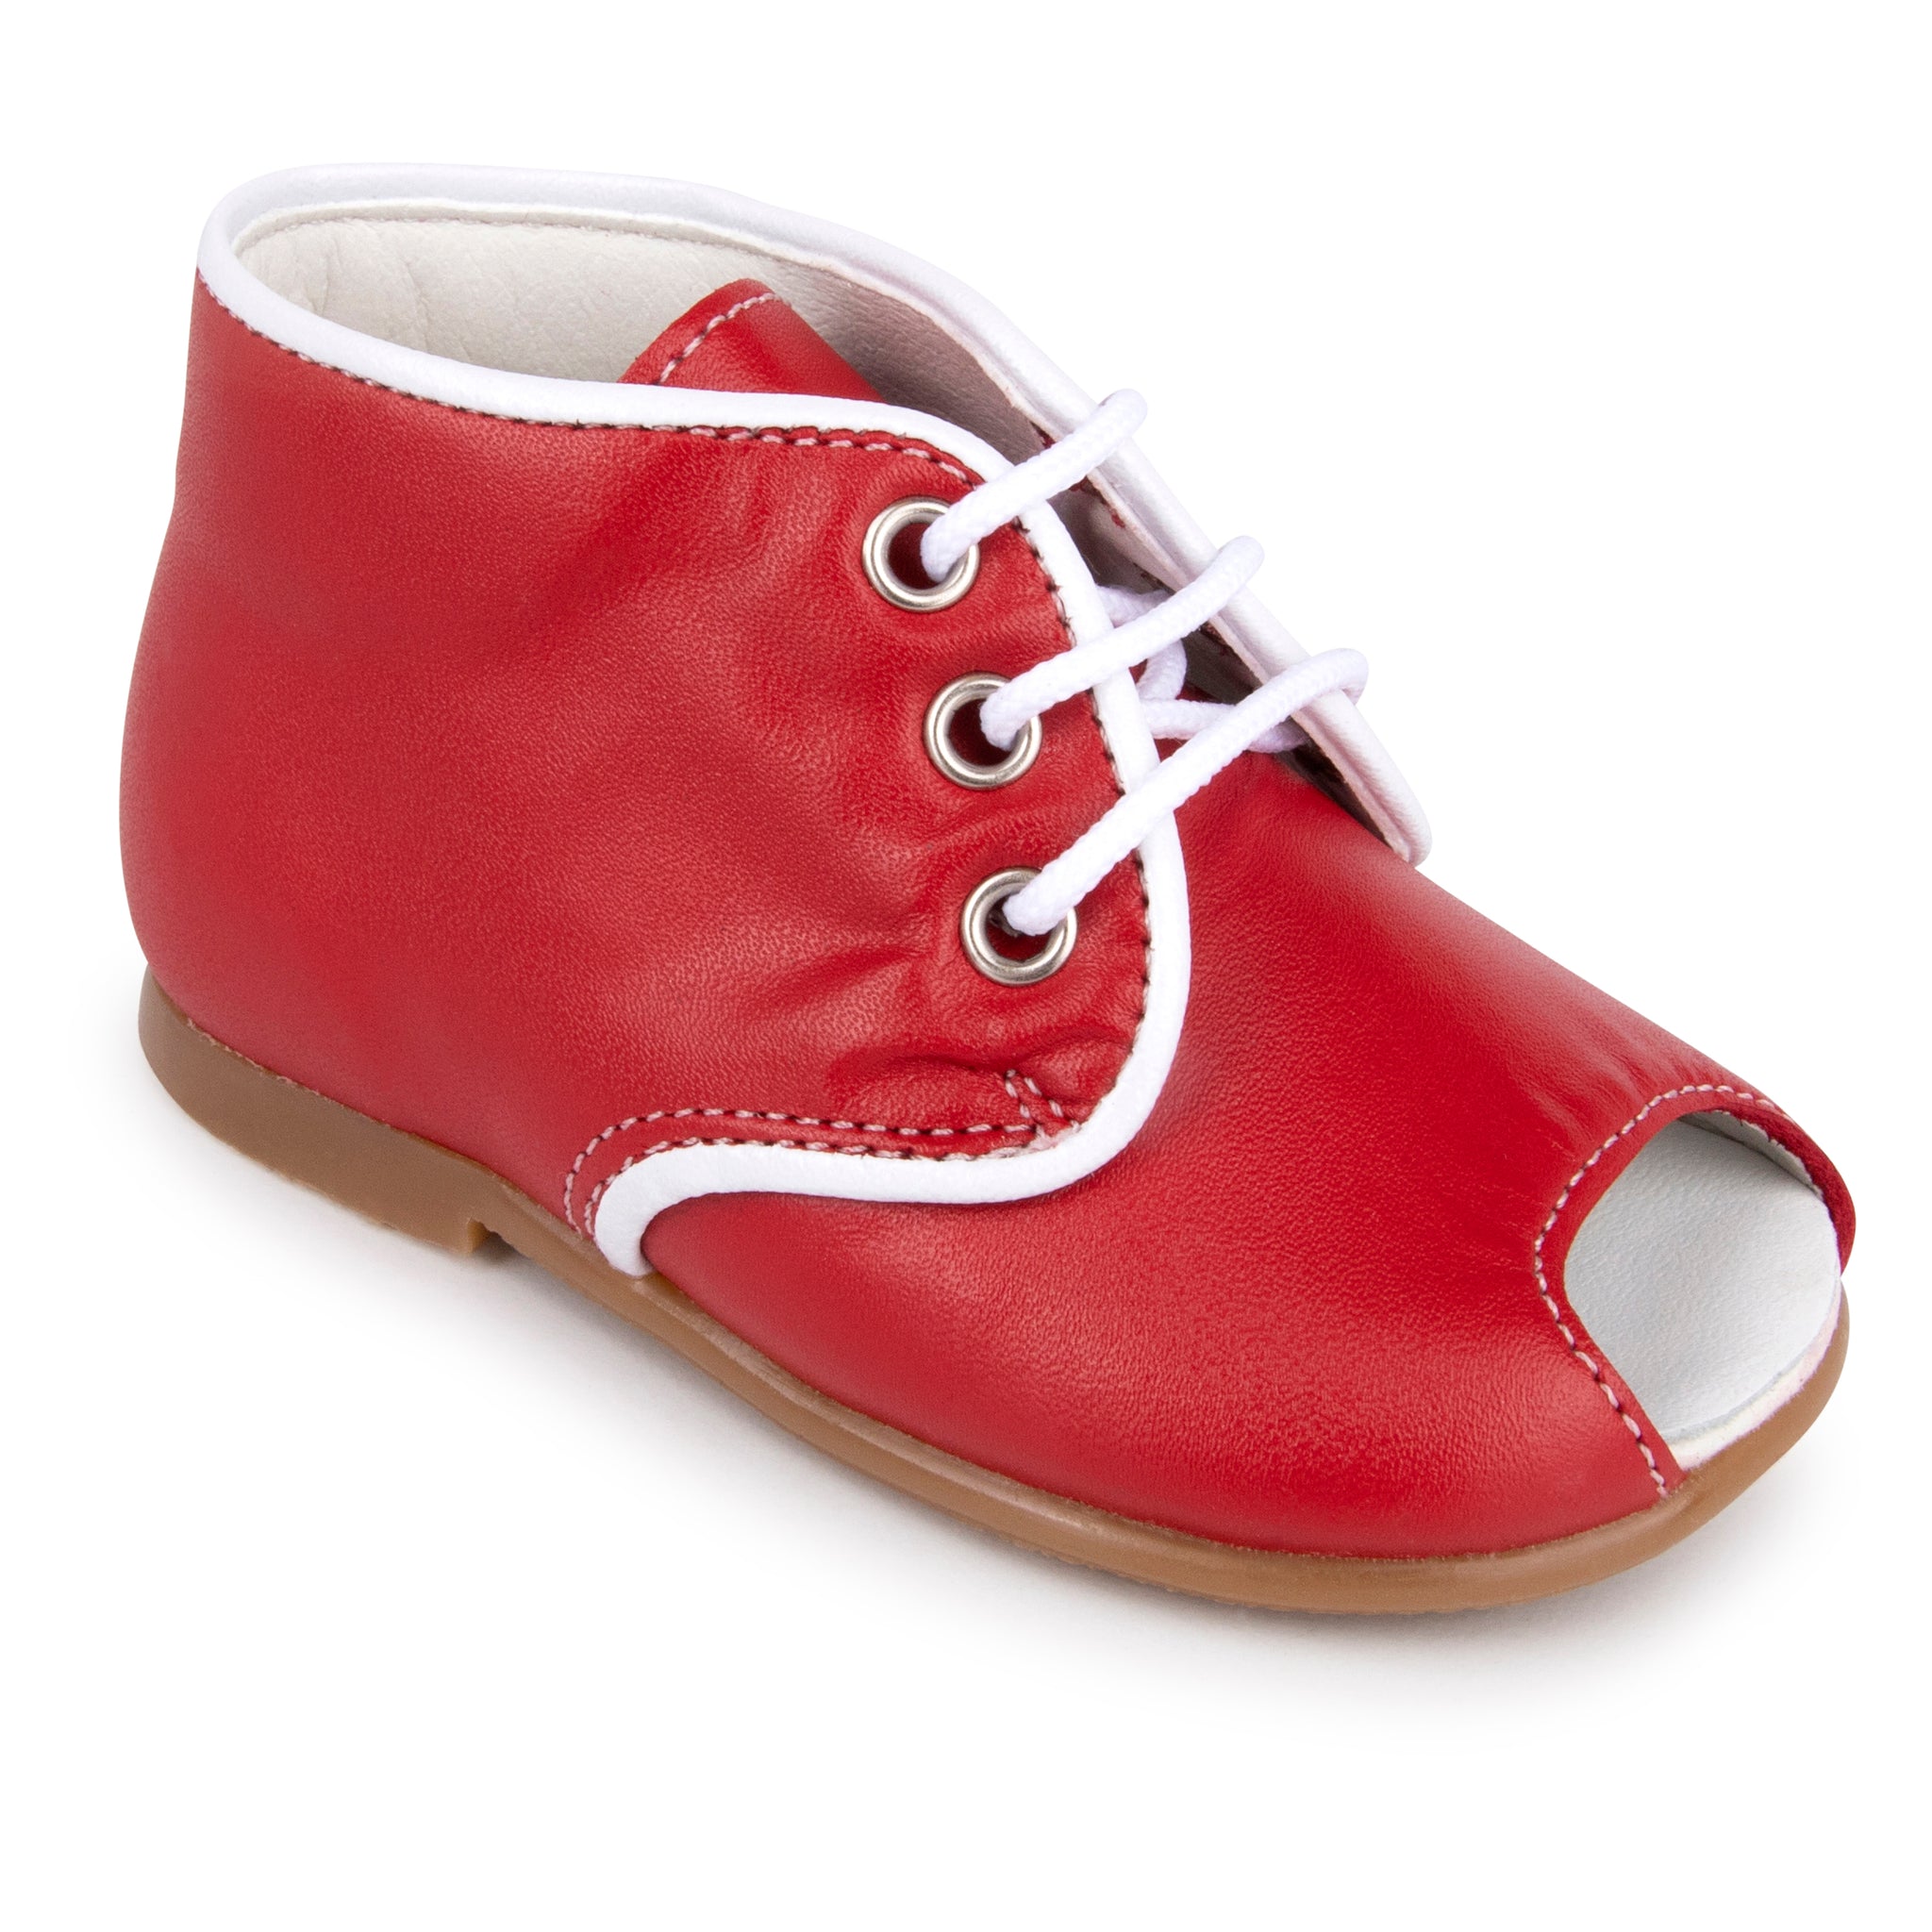 Zubii Red Open Toe Lace Up Shoes 380020 